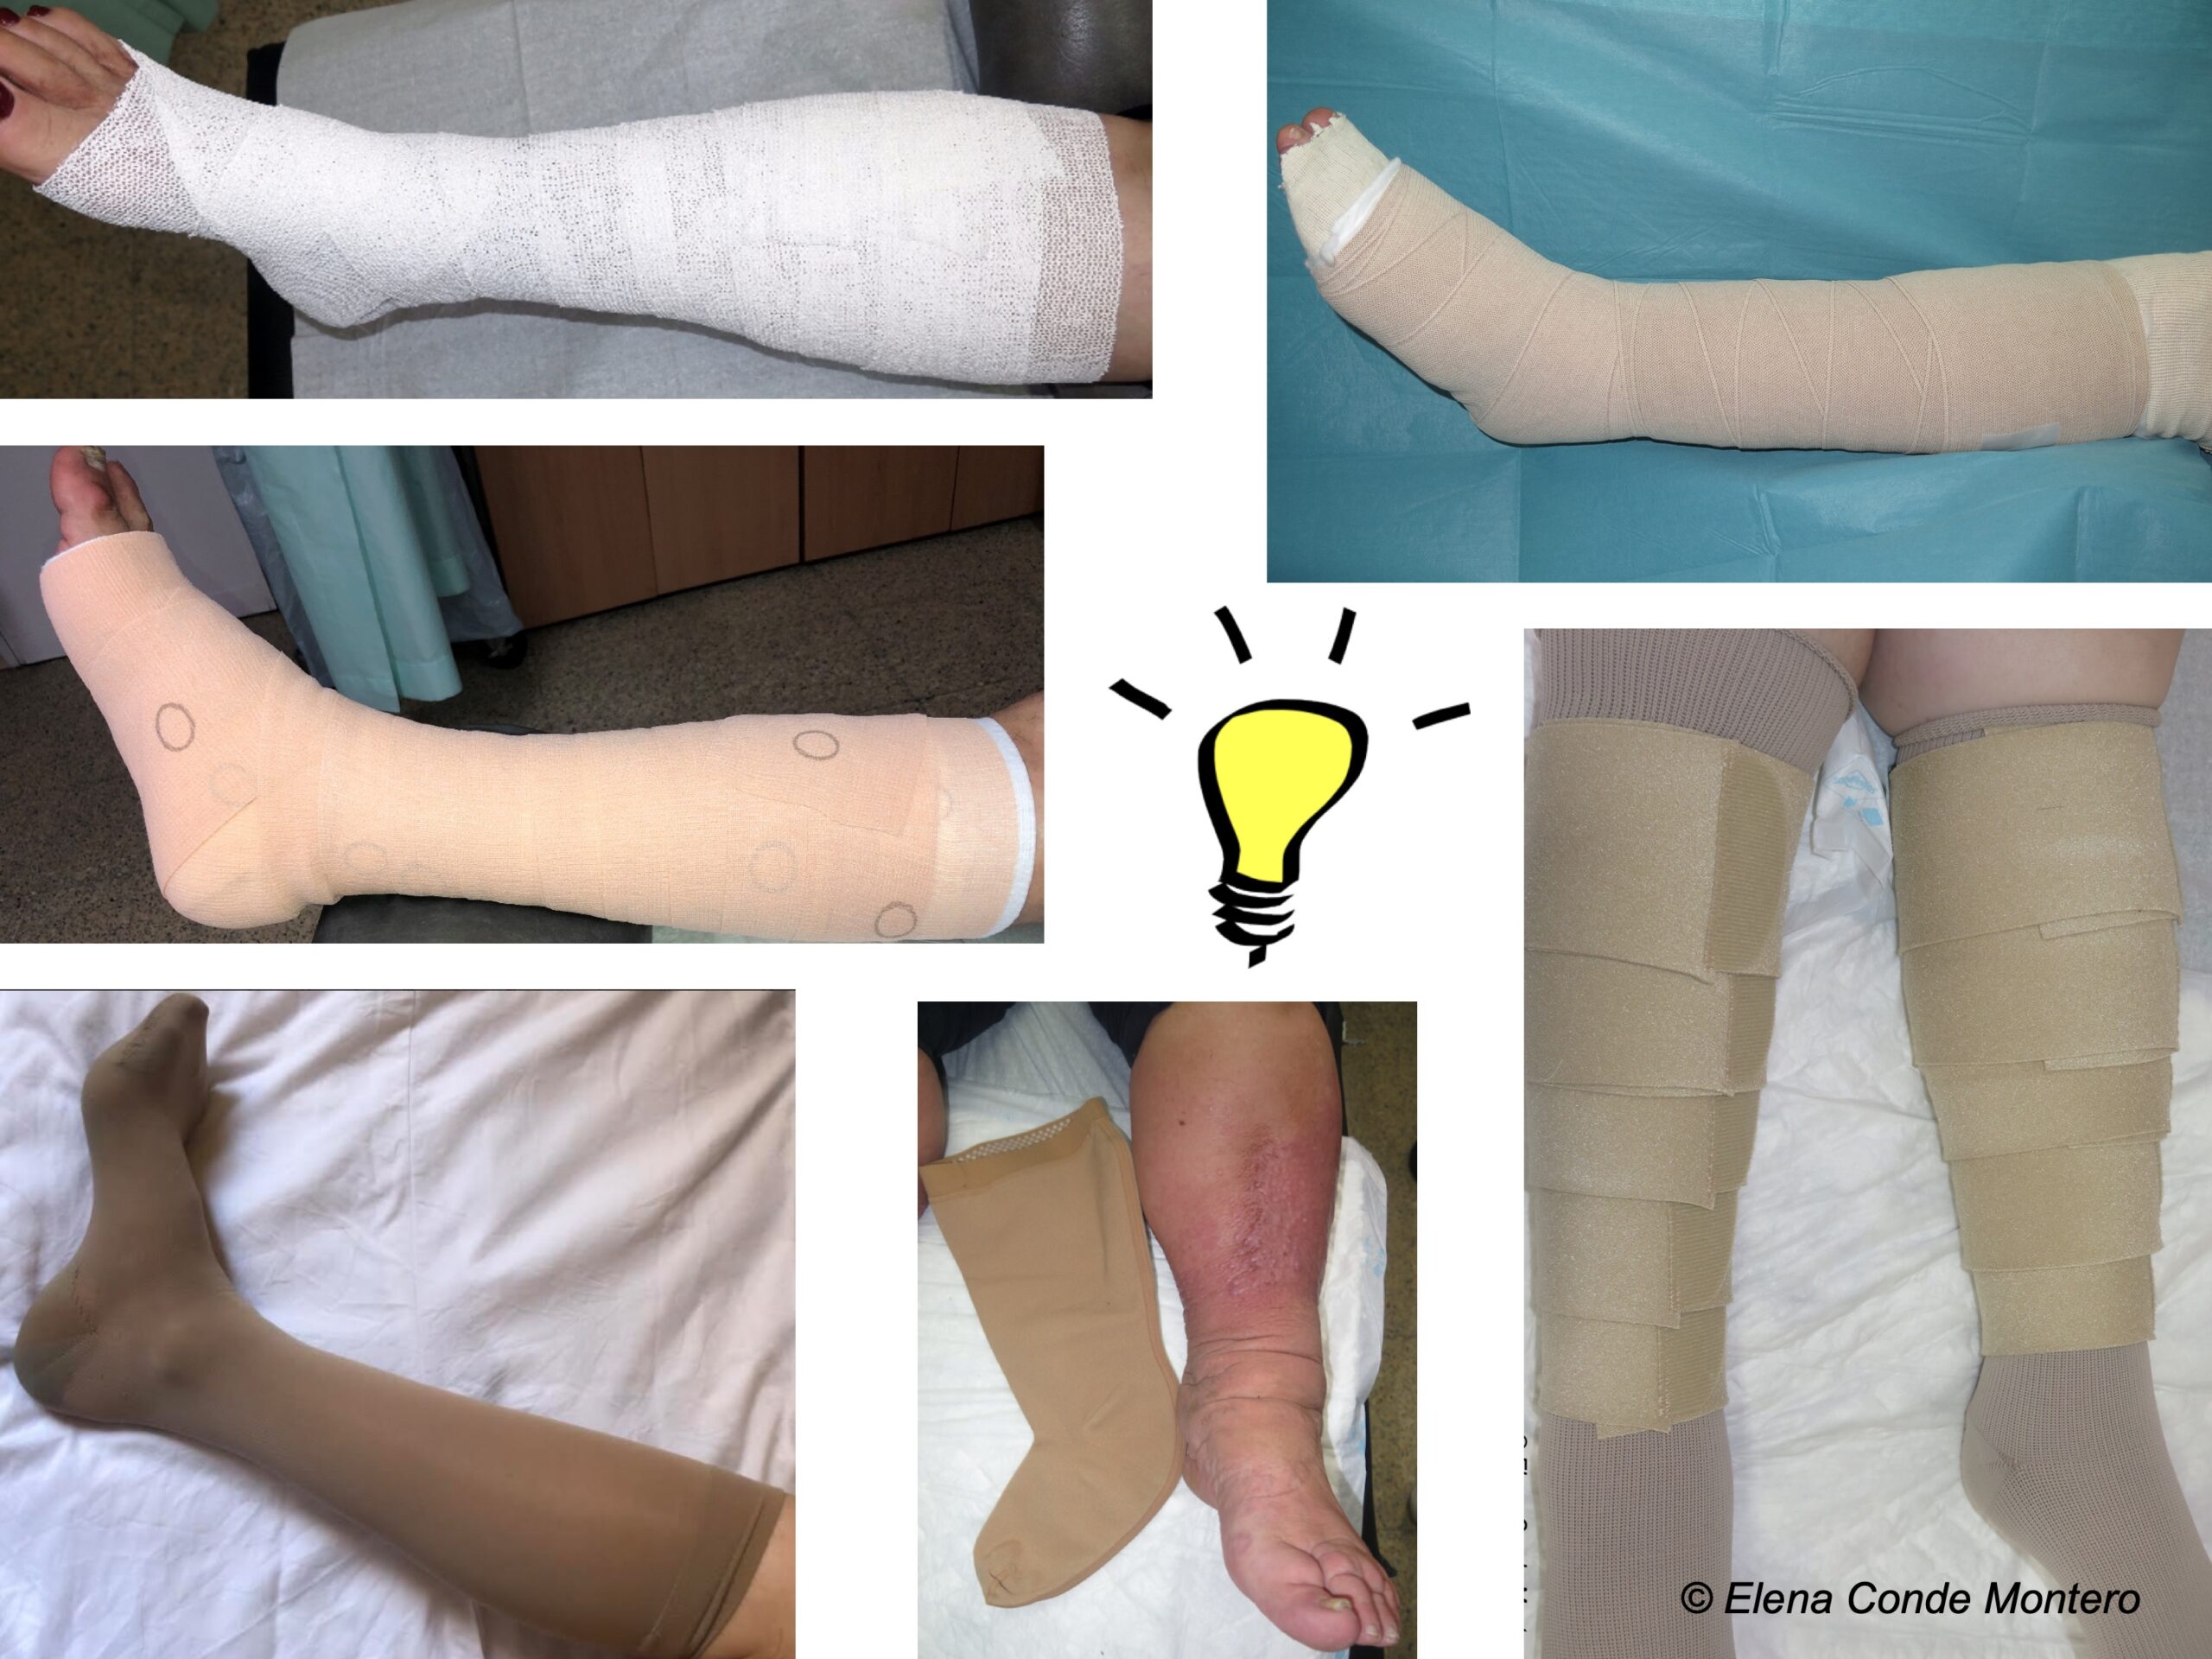 What type of compression therapy to choose in each situation?